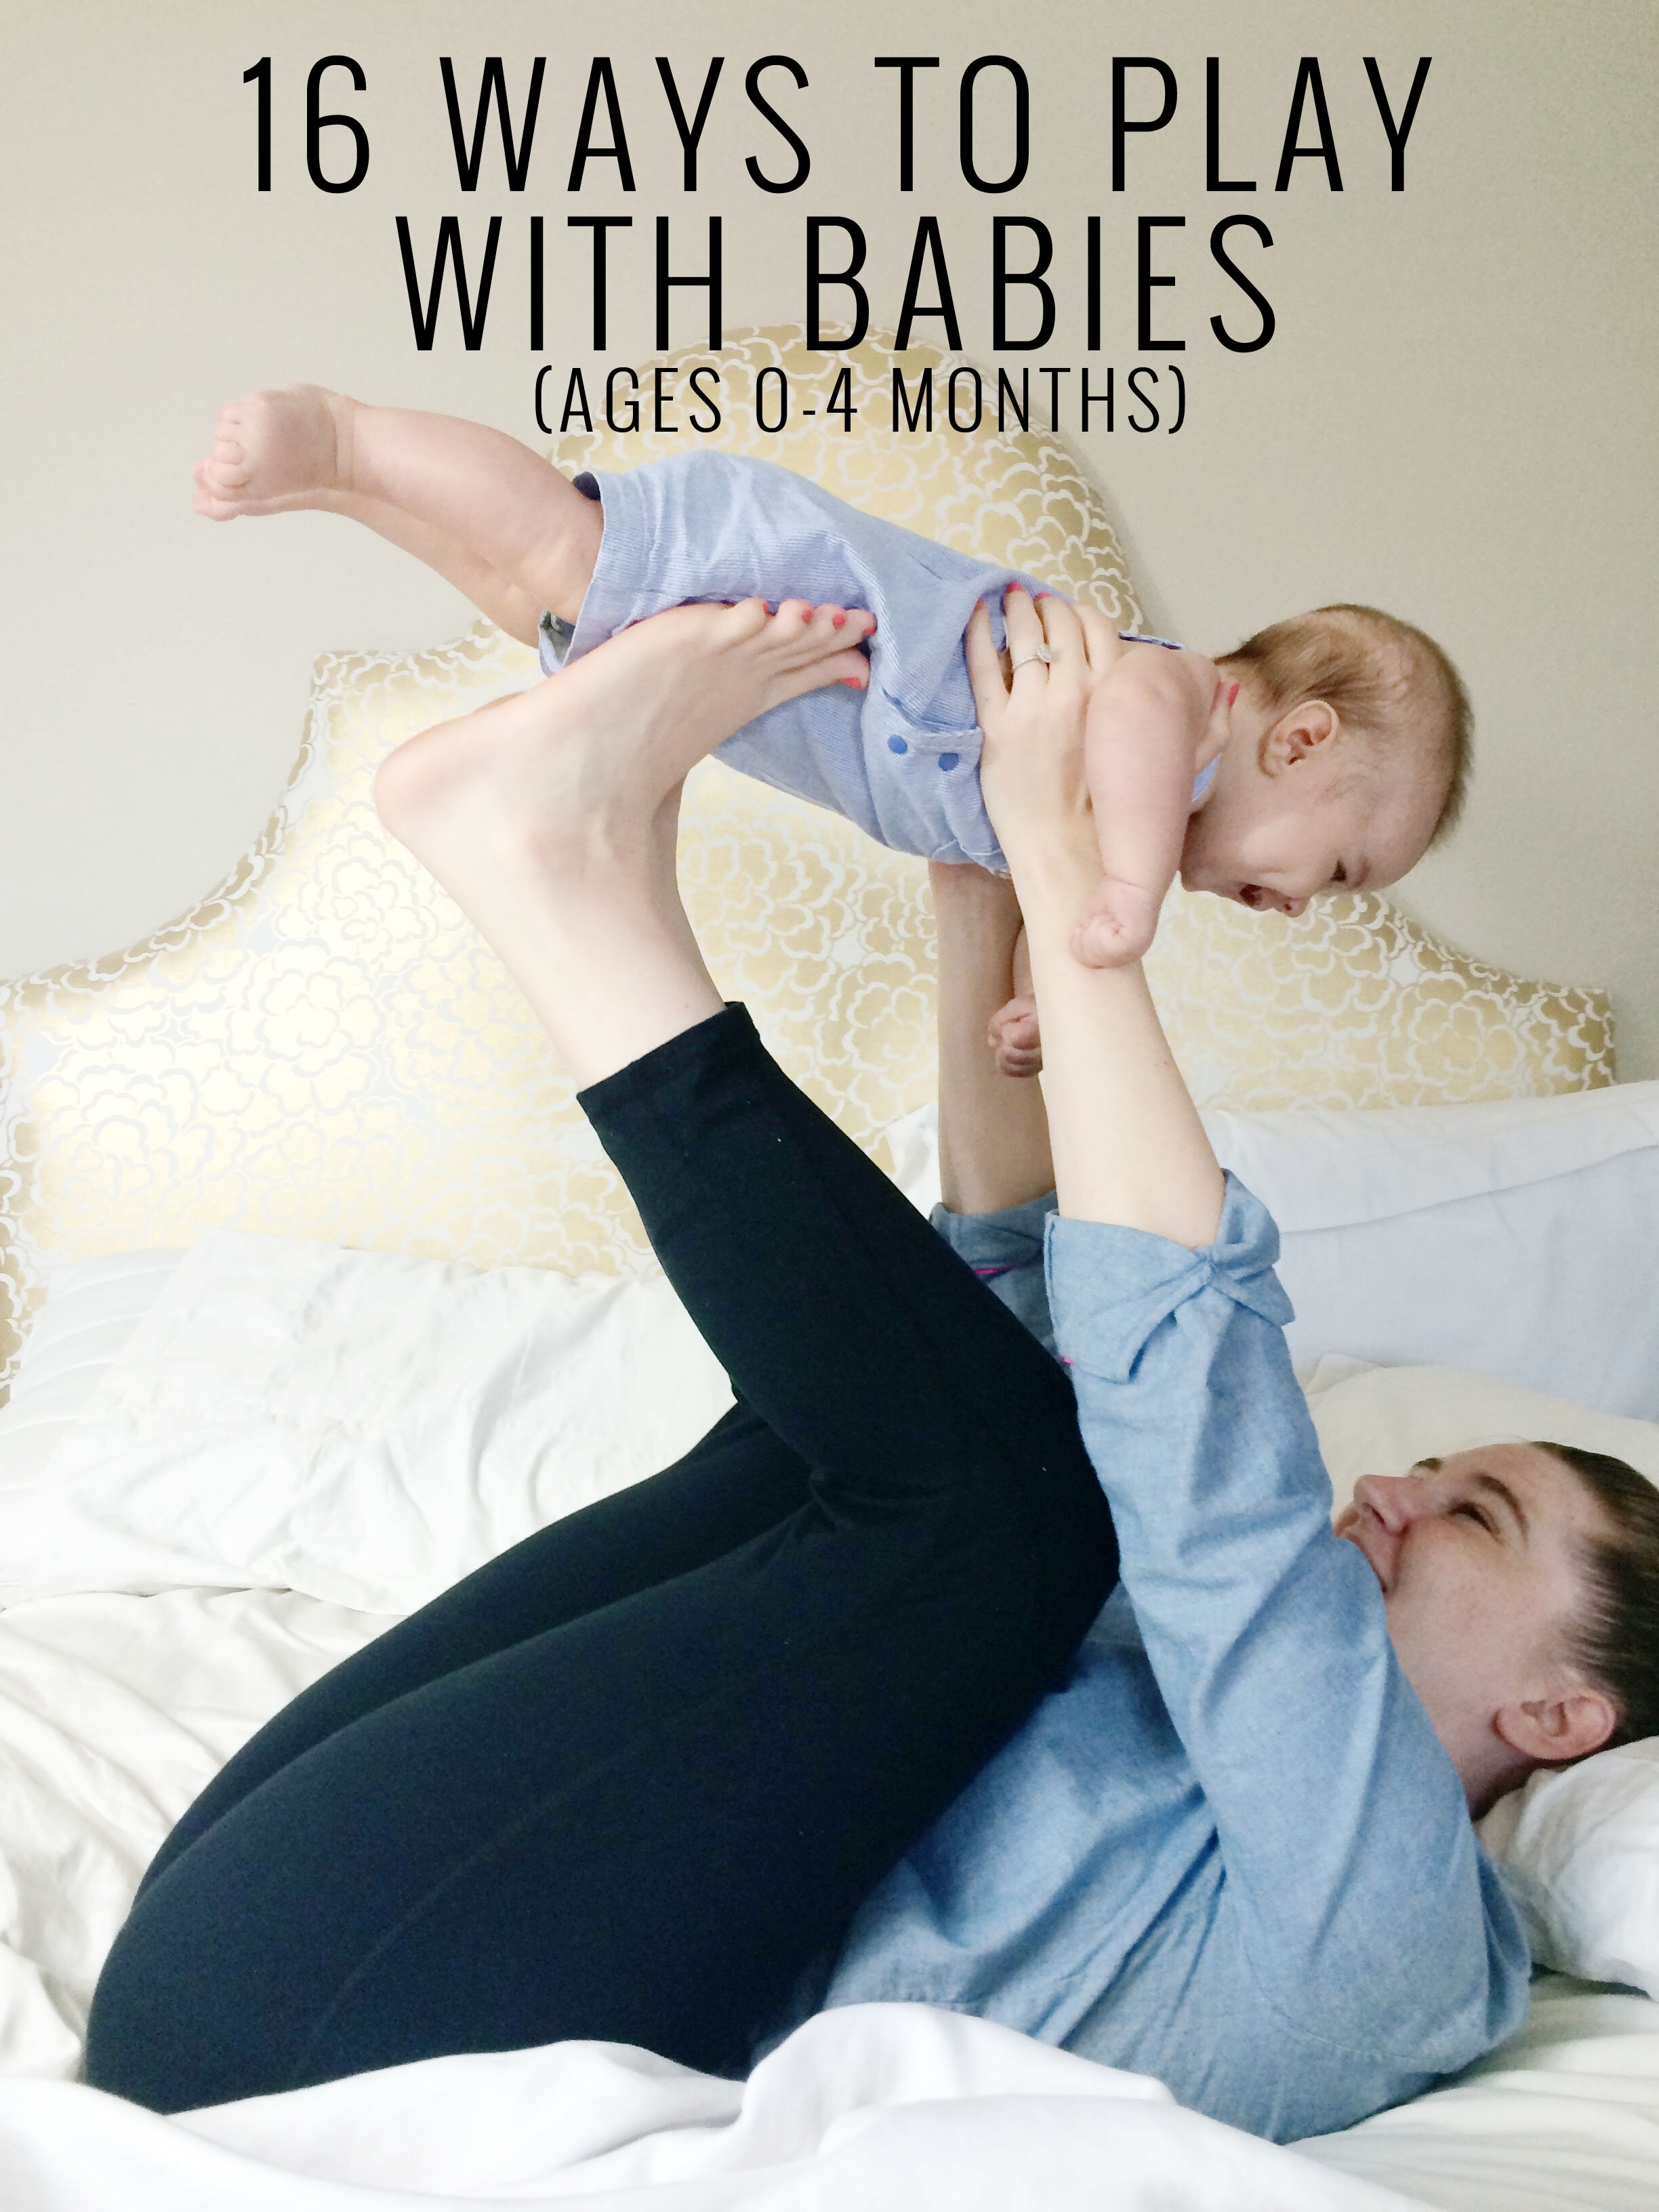 Baby Crawling: 12 Tips To Help Your Newborn Learn To Crawl